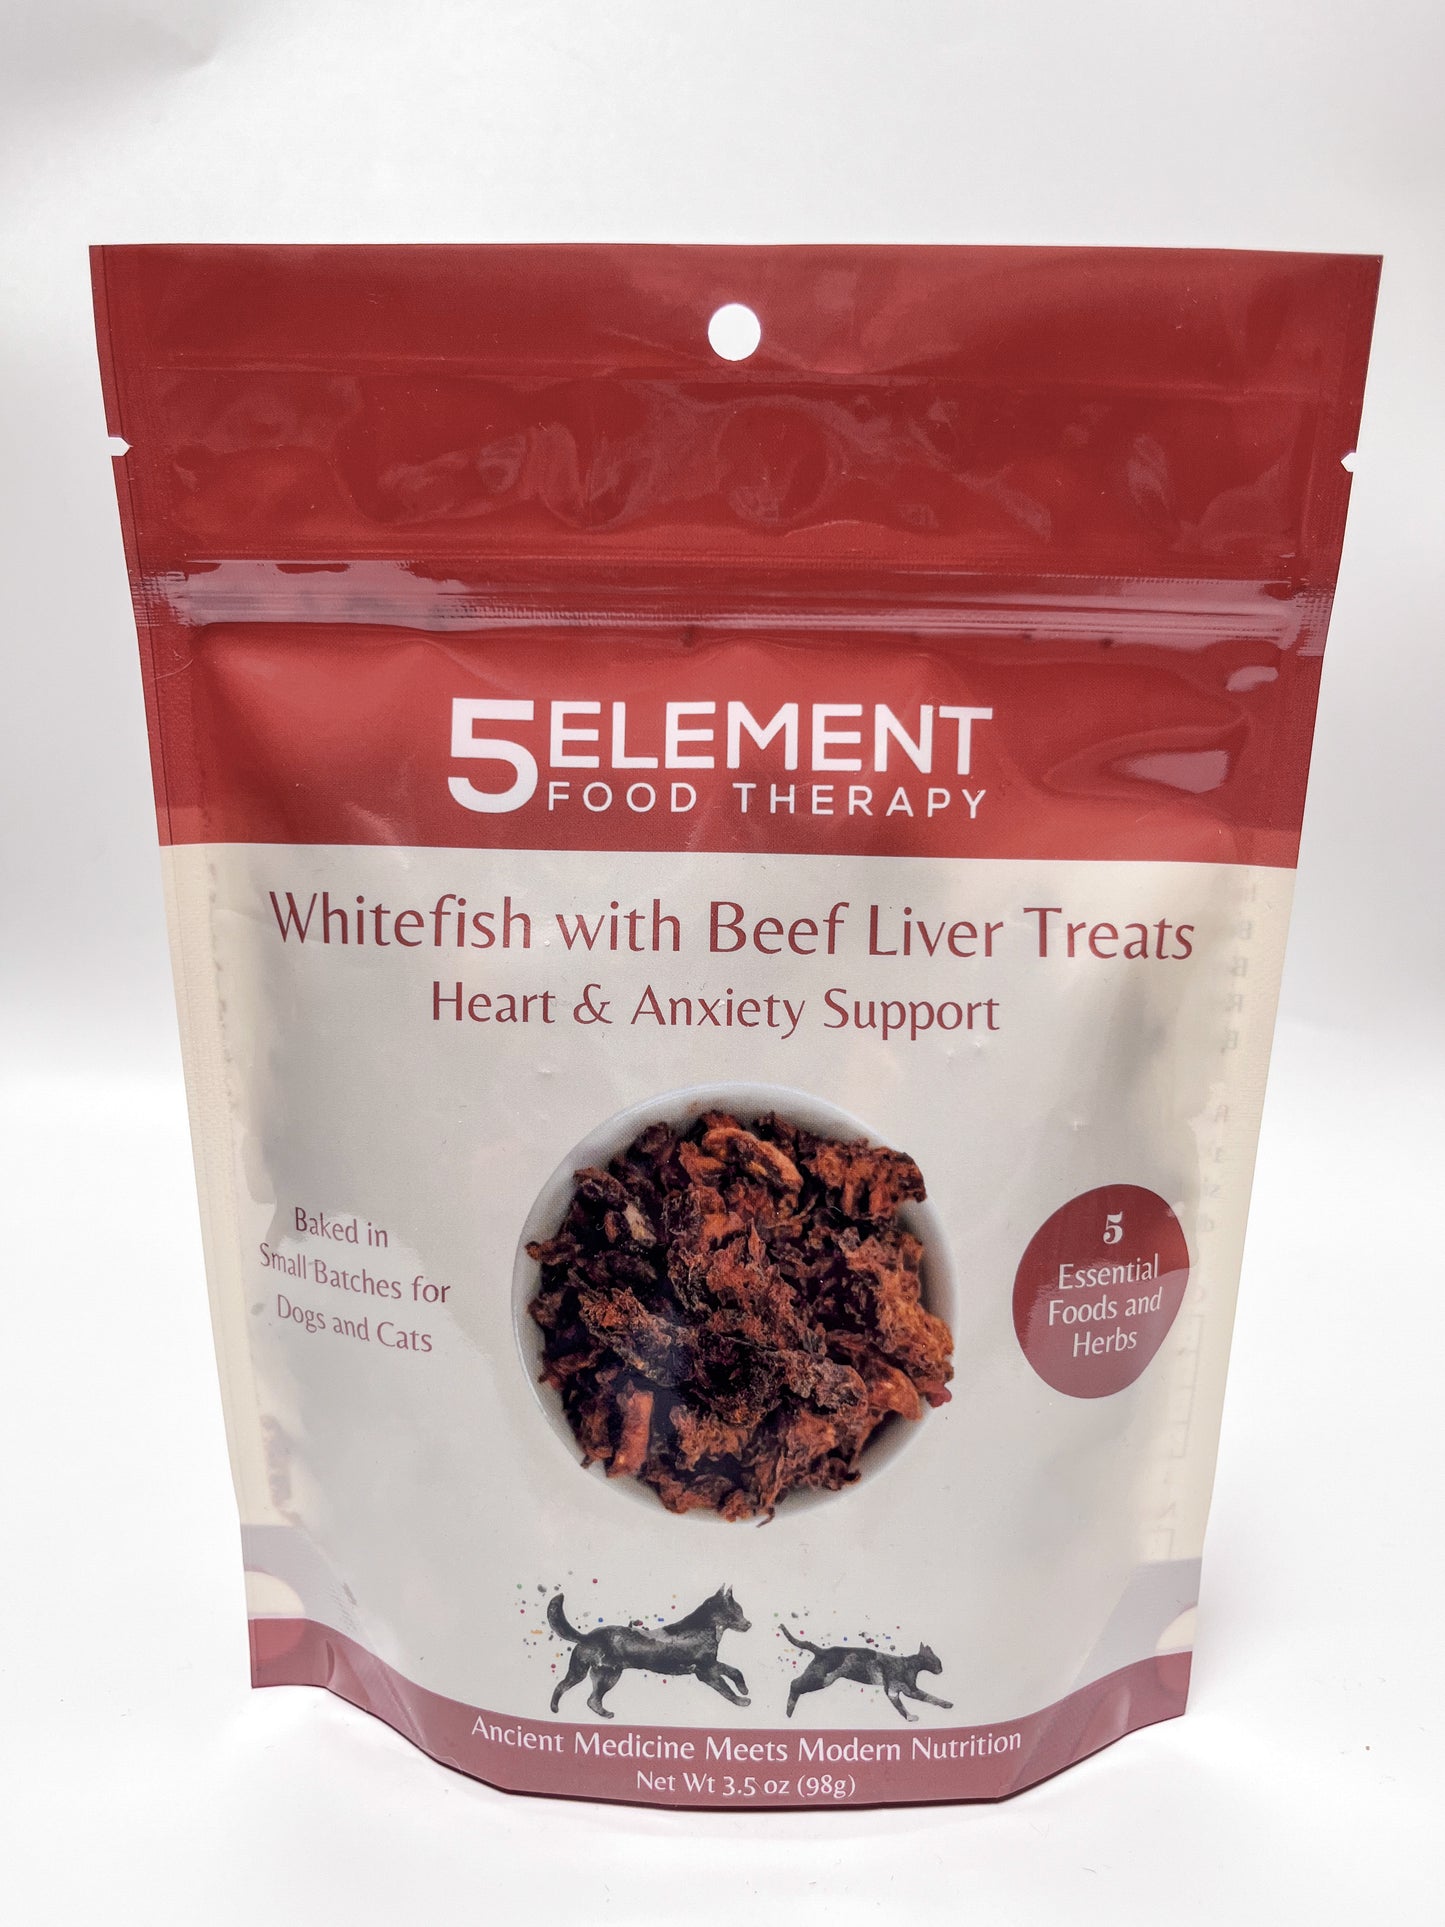 Whitefish with Beef Liver Treats